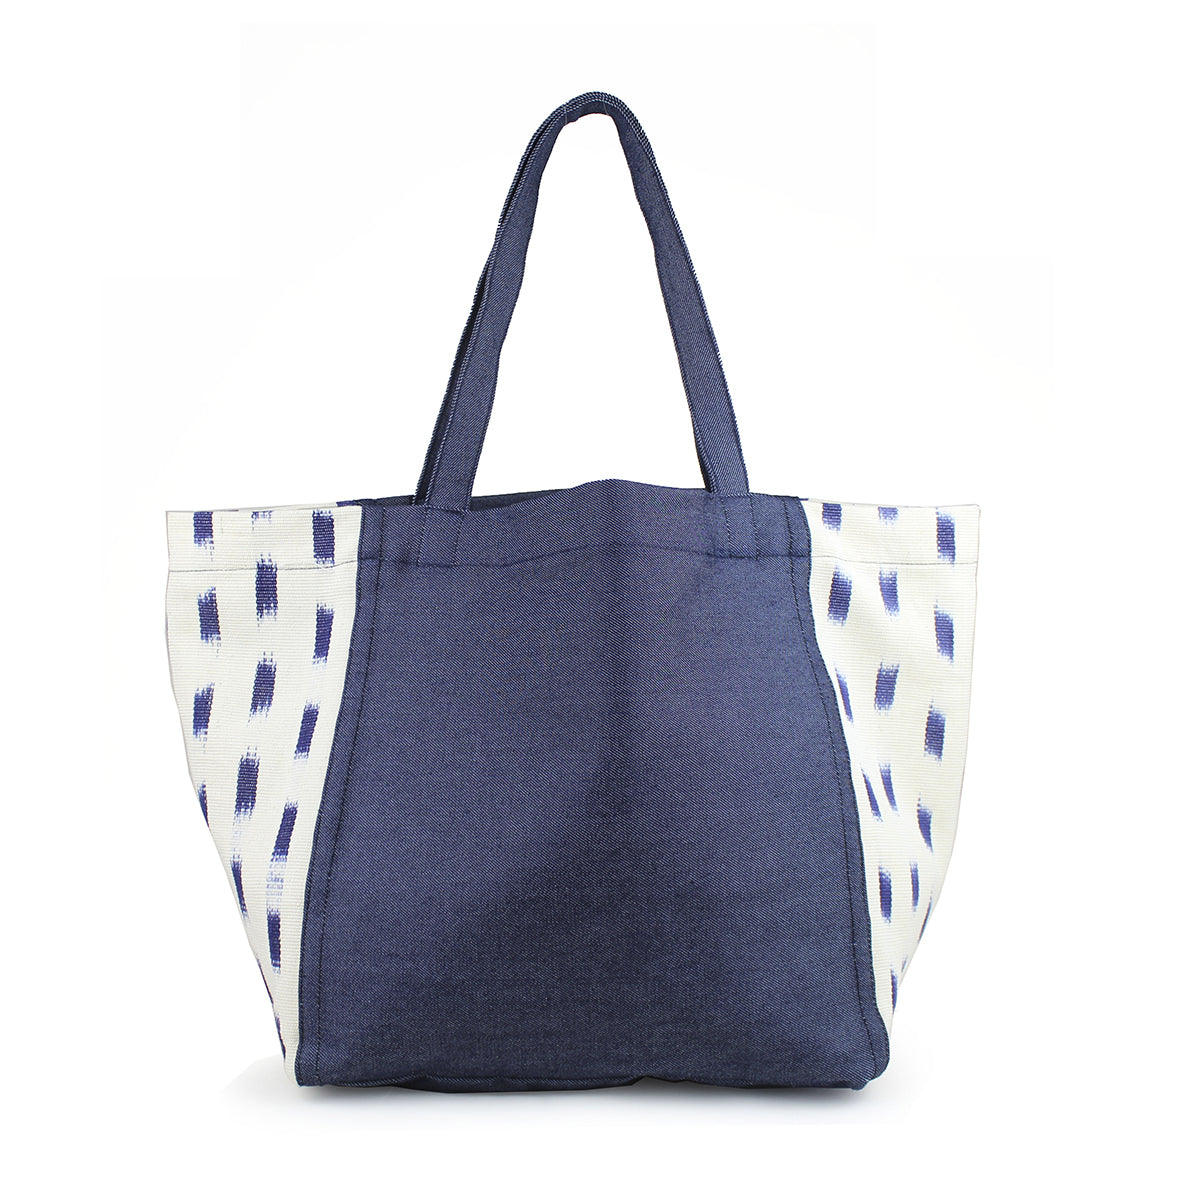 Blanca Artisan Handwoven Tote in Denim Jaspe. The tote has a dark denim wash. The sides have an abstract blue square pattern over a white background.